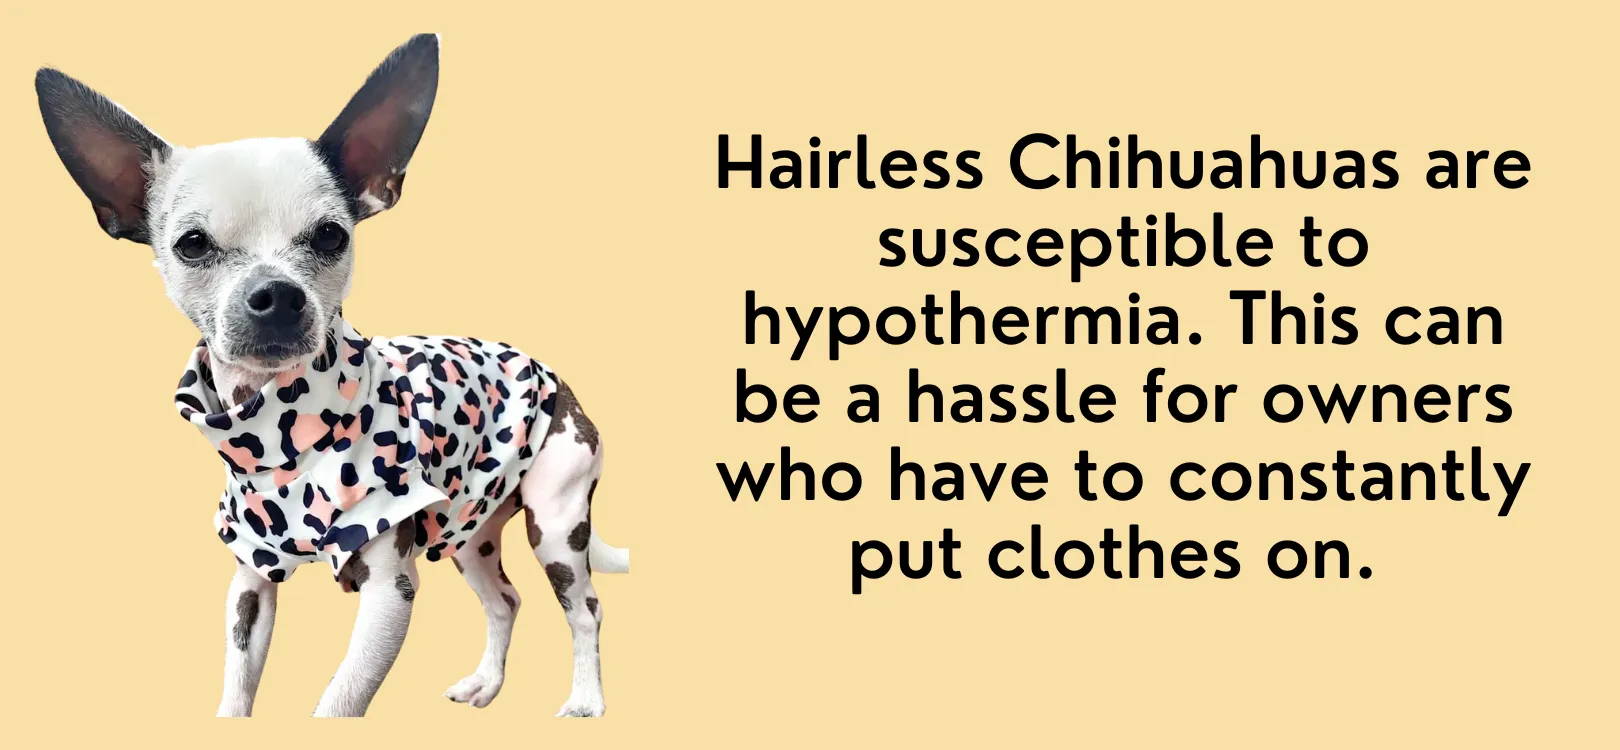 hairless chihuahua always cold